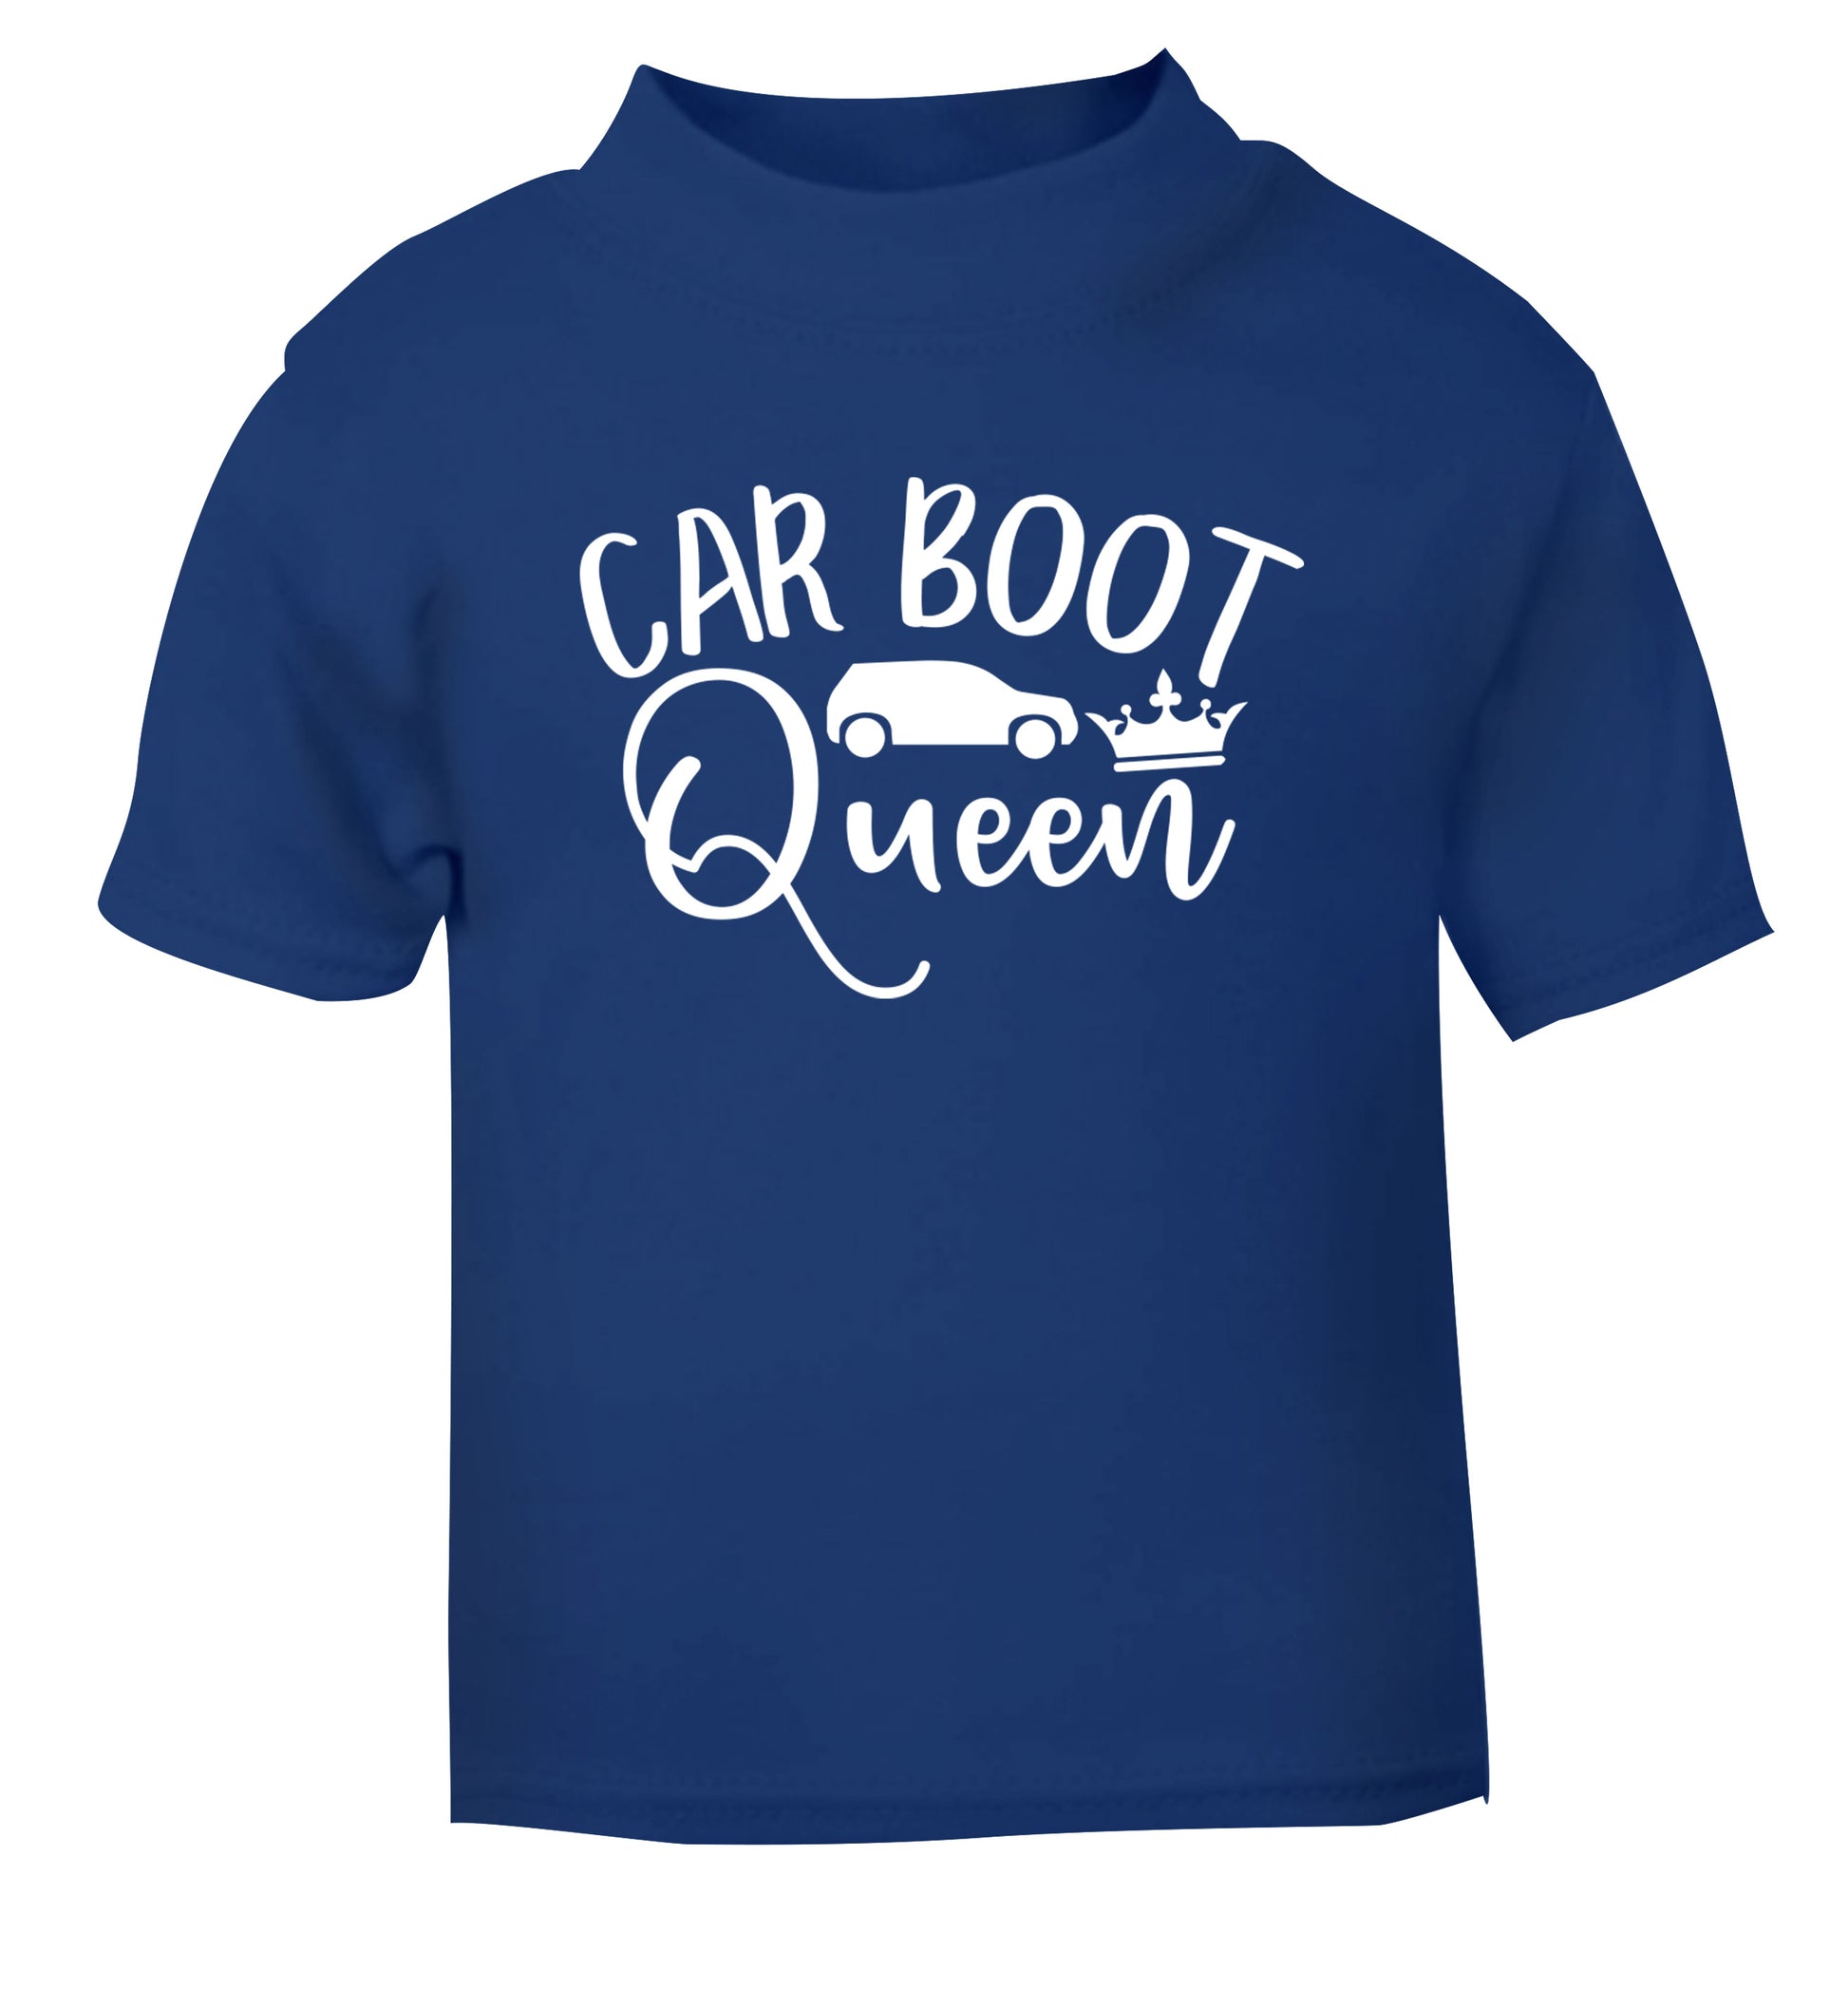 Carboot Queen blue Baby Toddler Tshirt 2 Years